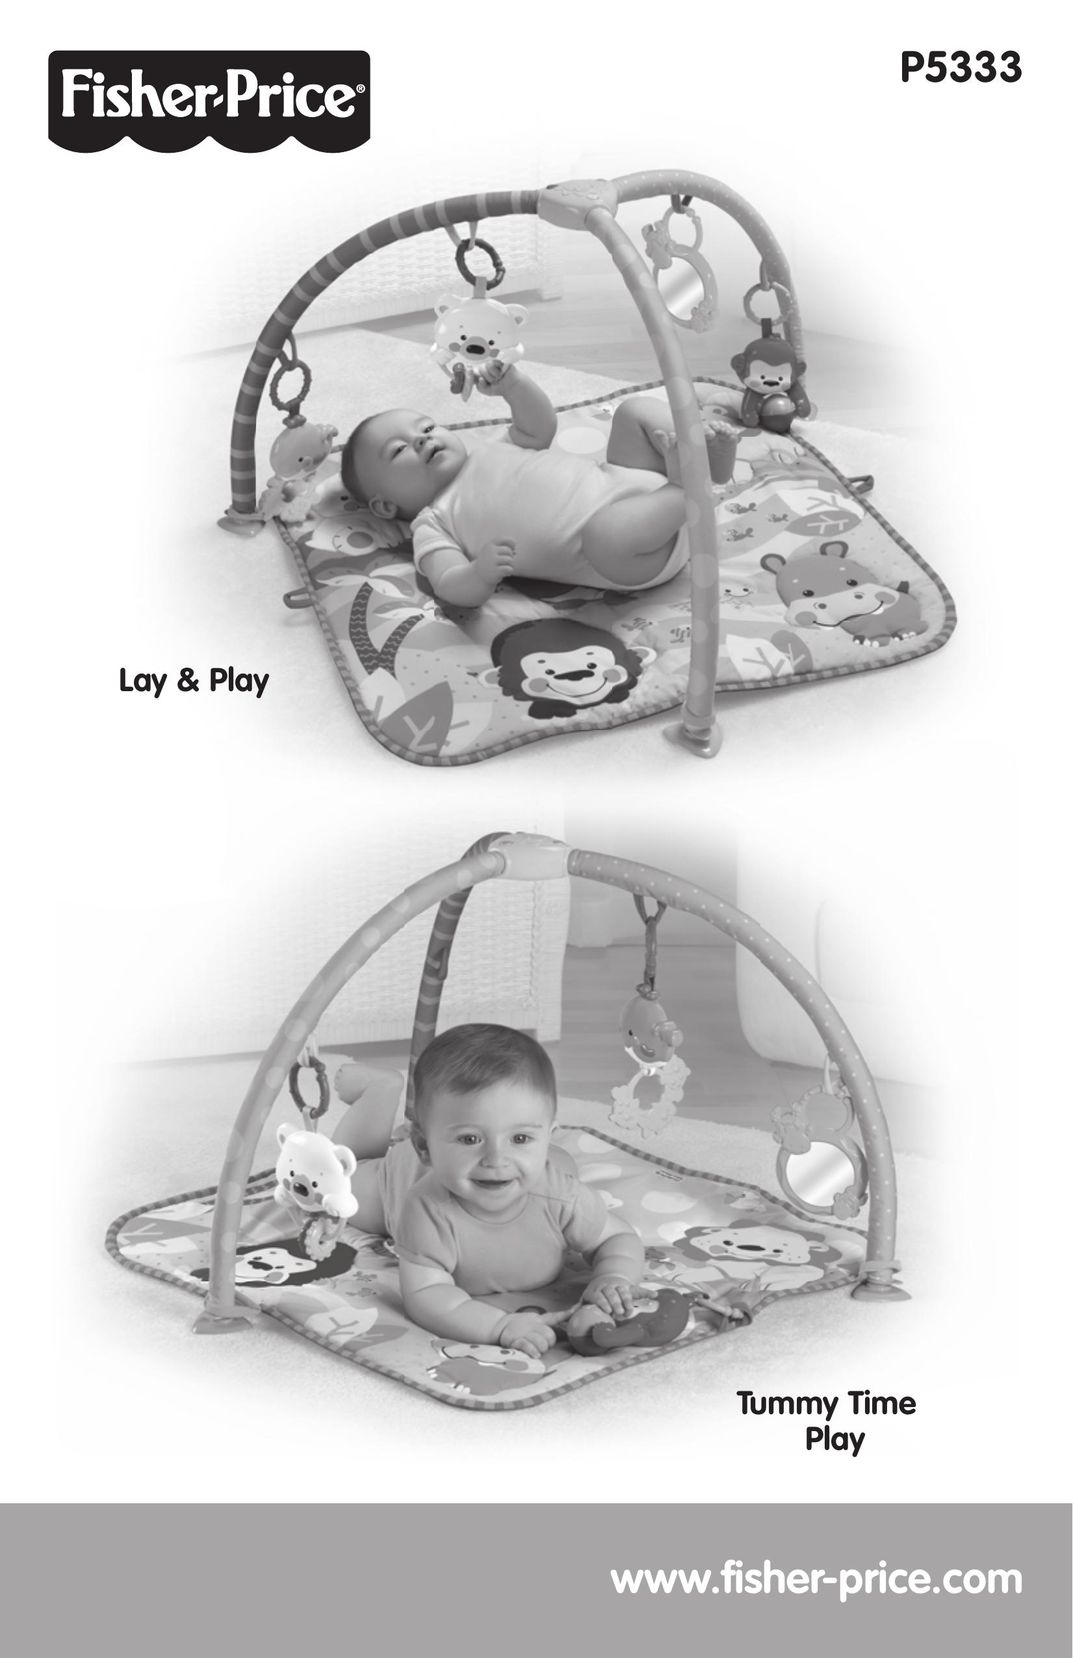 Fisher-Price P5333 Baby Gym User Manual